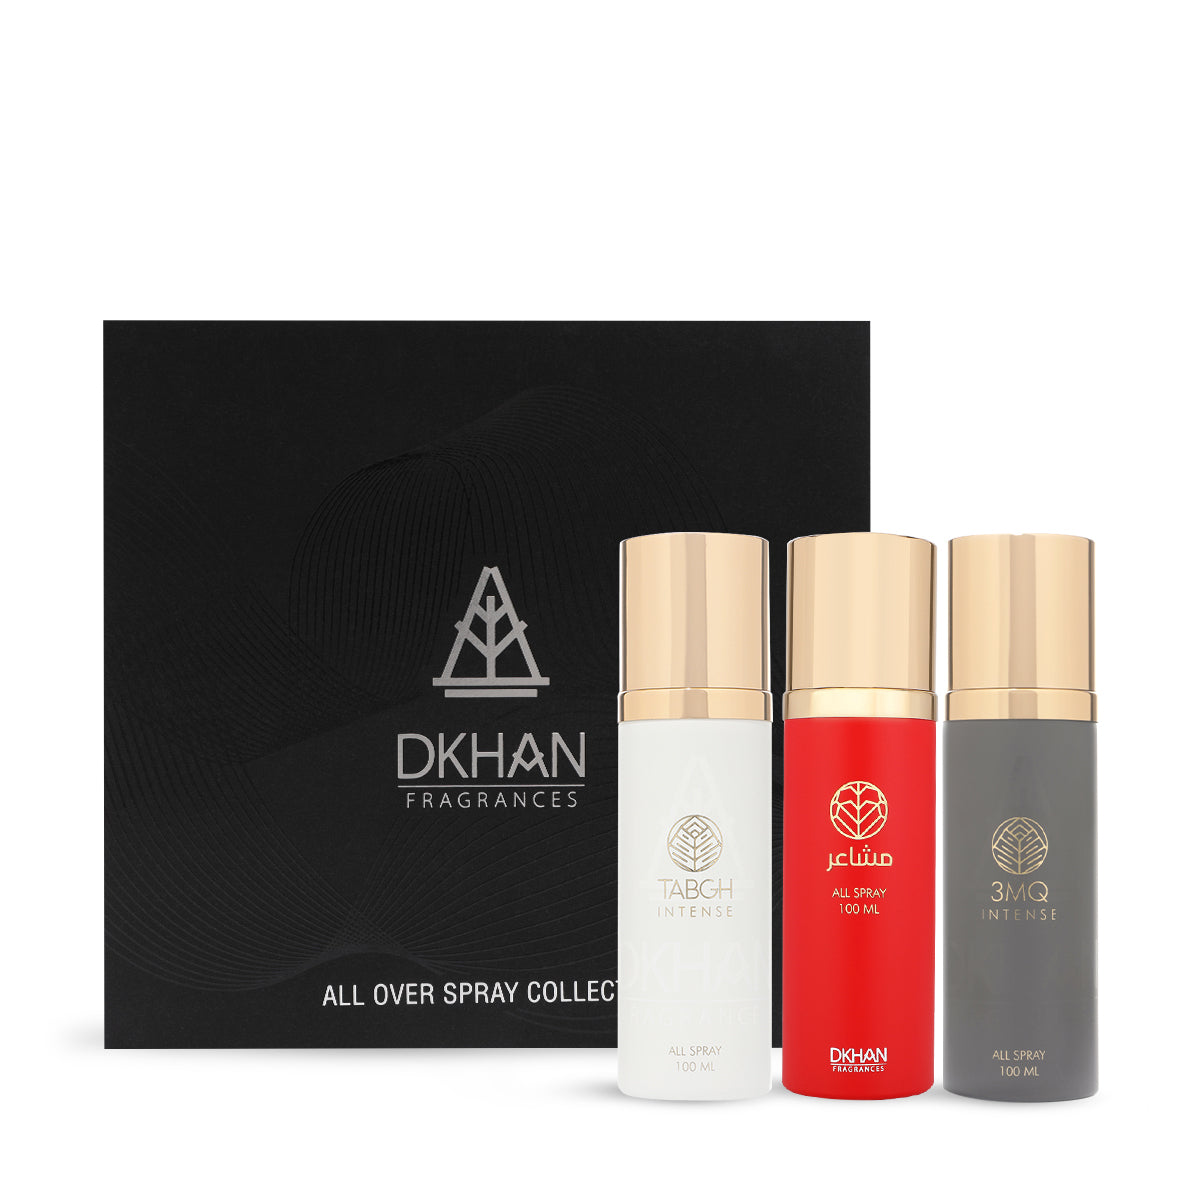 This image showcases the All Over Spray Collection from DKHAN Fragrances, featuring three 100ml spray bottles in white, red, and grey, respectively, each capped with a luxurious gold finish. The bottles are labeled 'TABGH INTENSE,' 'club INTENSE,' and '3MQ INTENSE' in a sleek typeface corresponding with their colors. They are displayed in front of a sophisticated black box that bears the DKHAN Fragrances logo—a triangle with a heart inside—and the collection's name in elegant lettering.